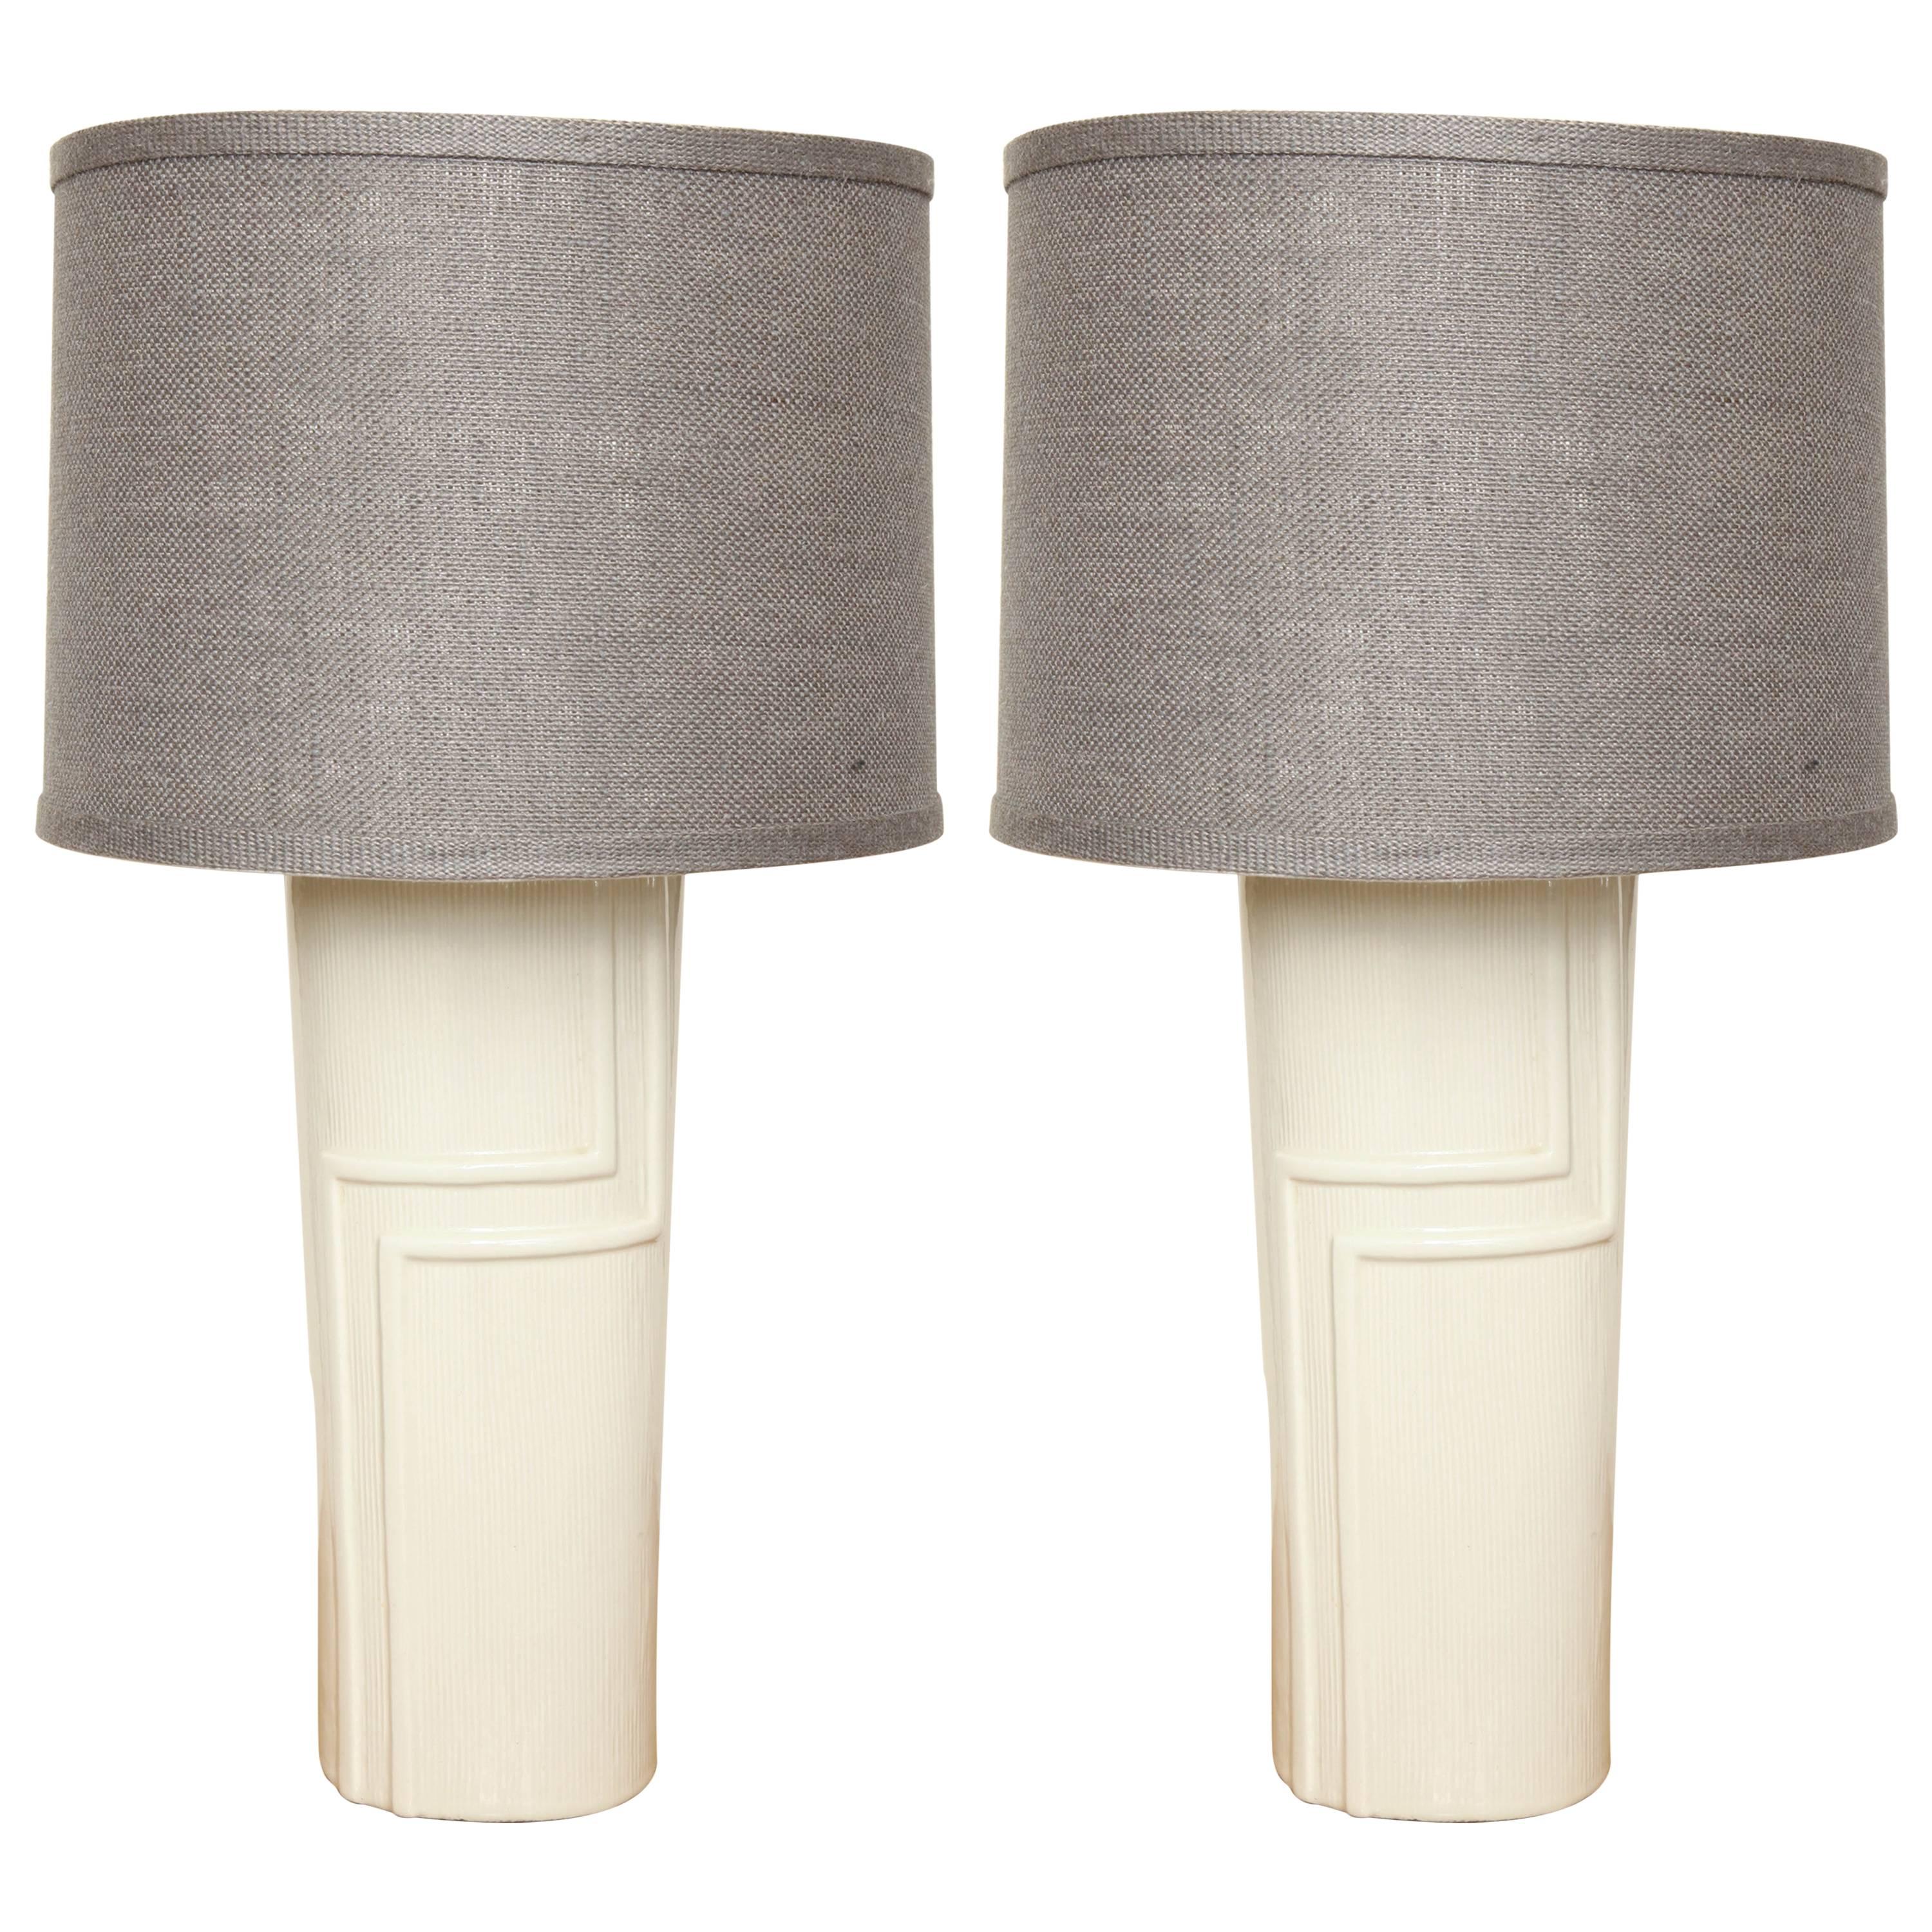 Pair of Lamps with Graphic Design, circa 1960